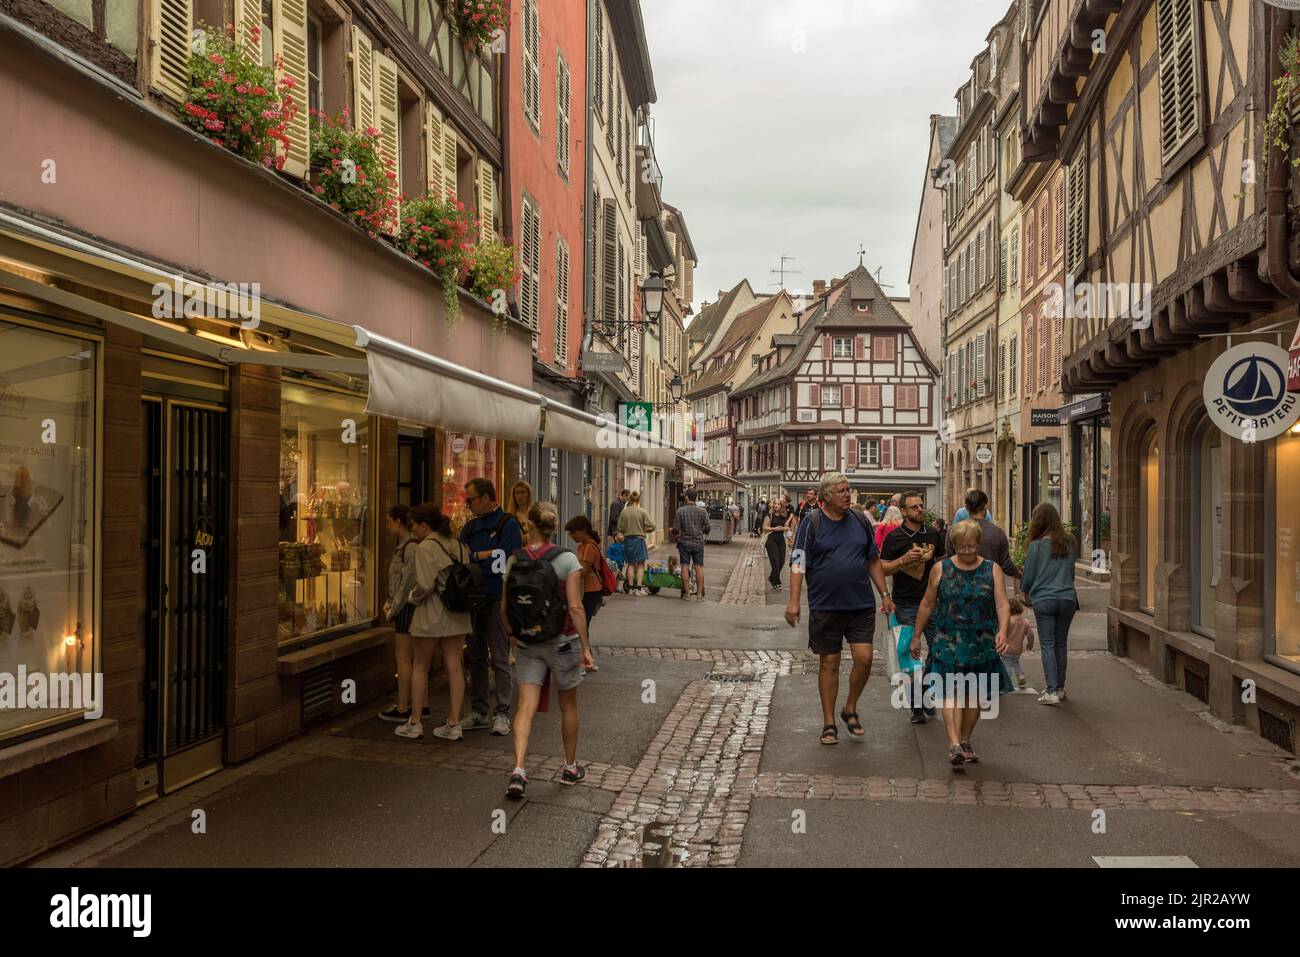 People on a pedestrian street in the historic center of Colmar, Alsace, France Stock Photo